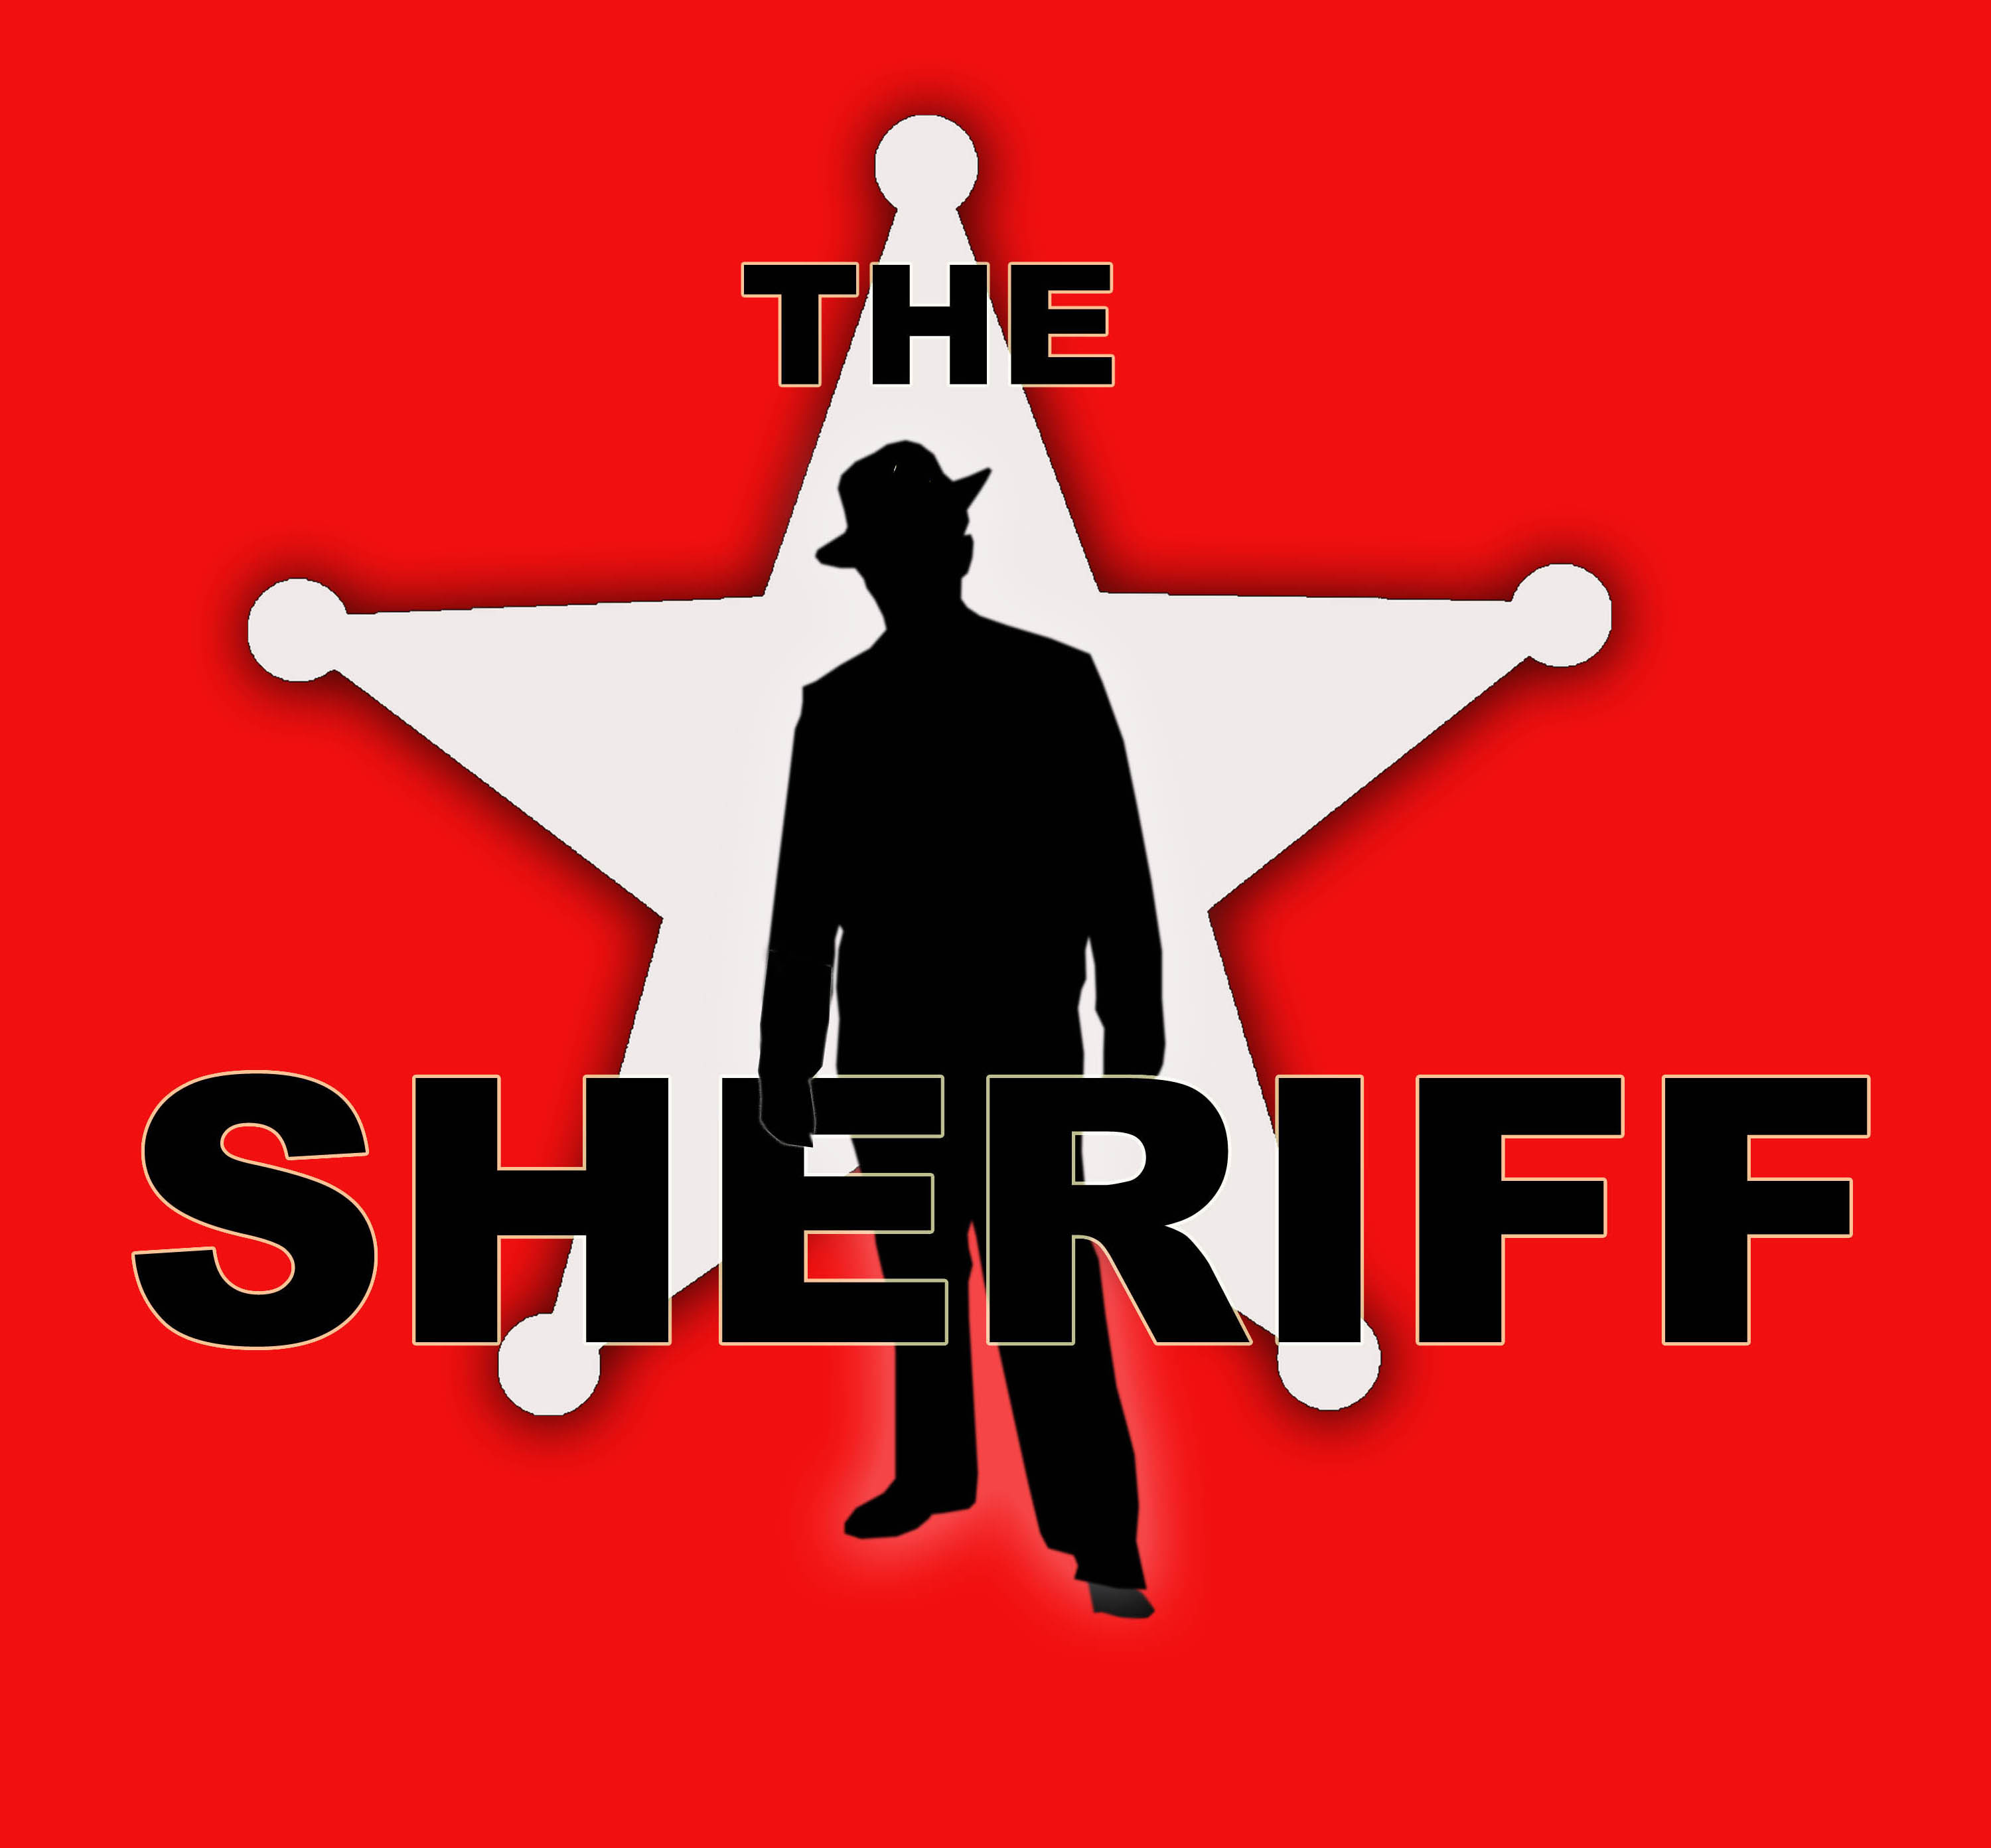 THE SHERIFF (Episode 3) - Elect Ray Wilson